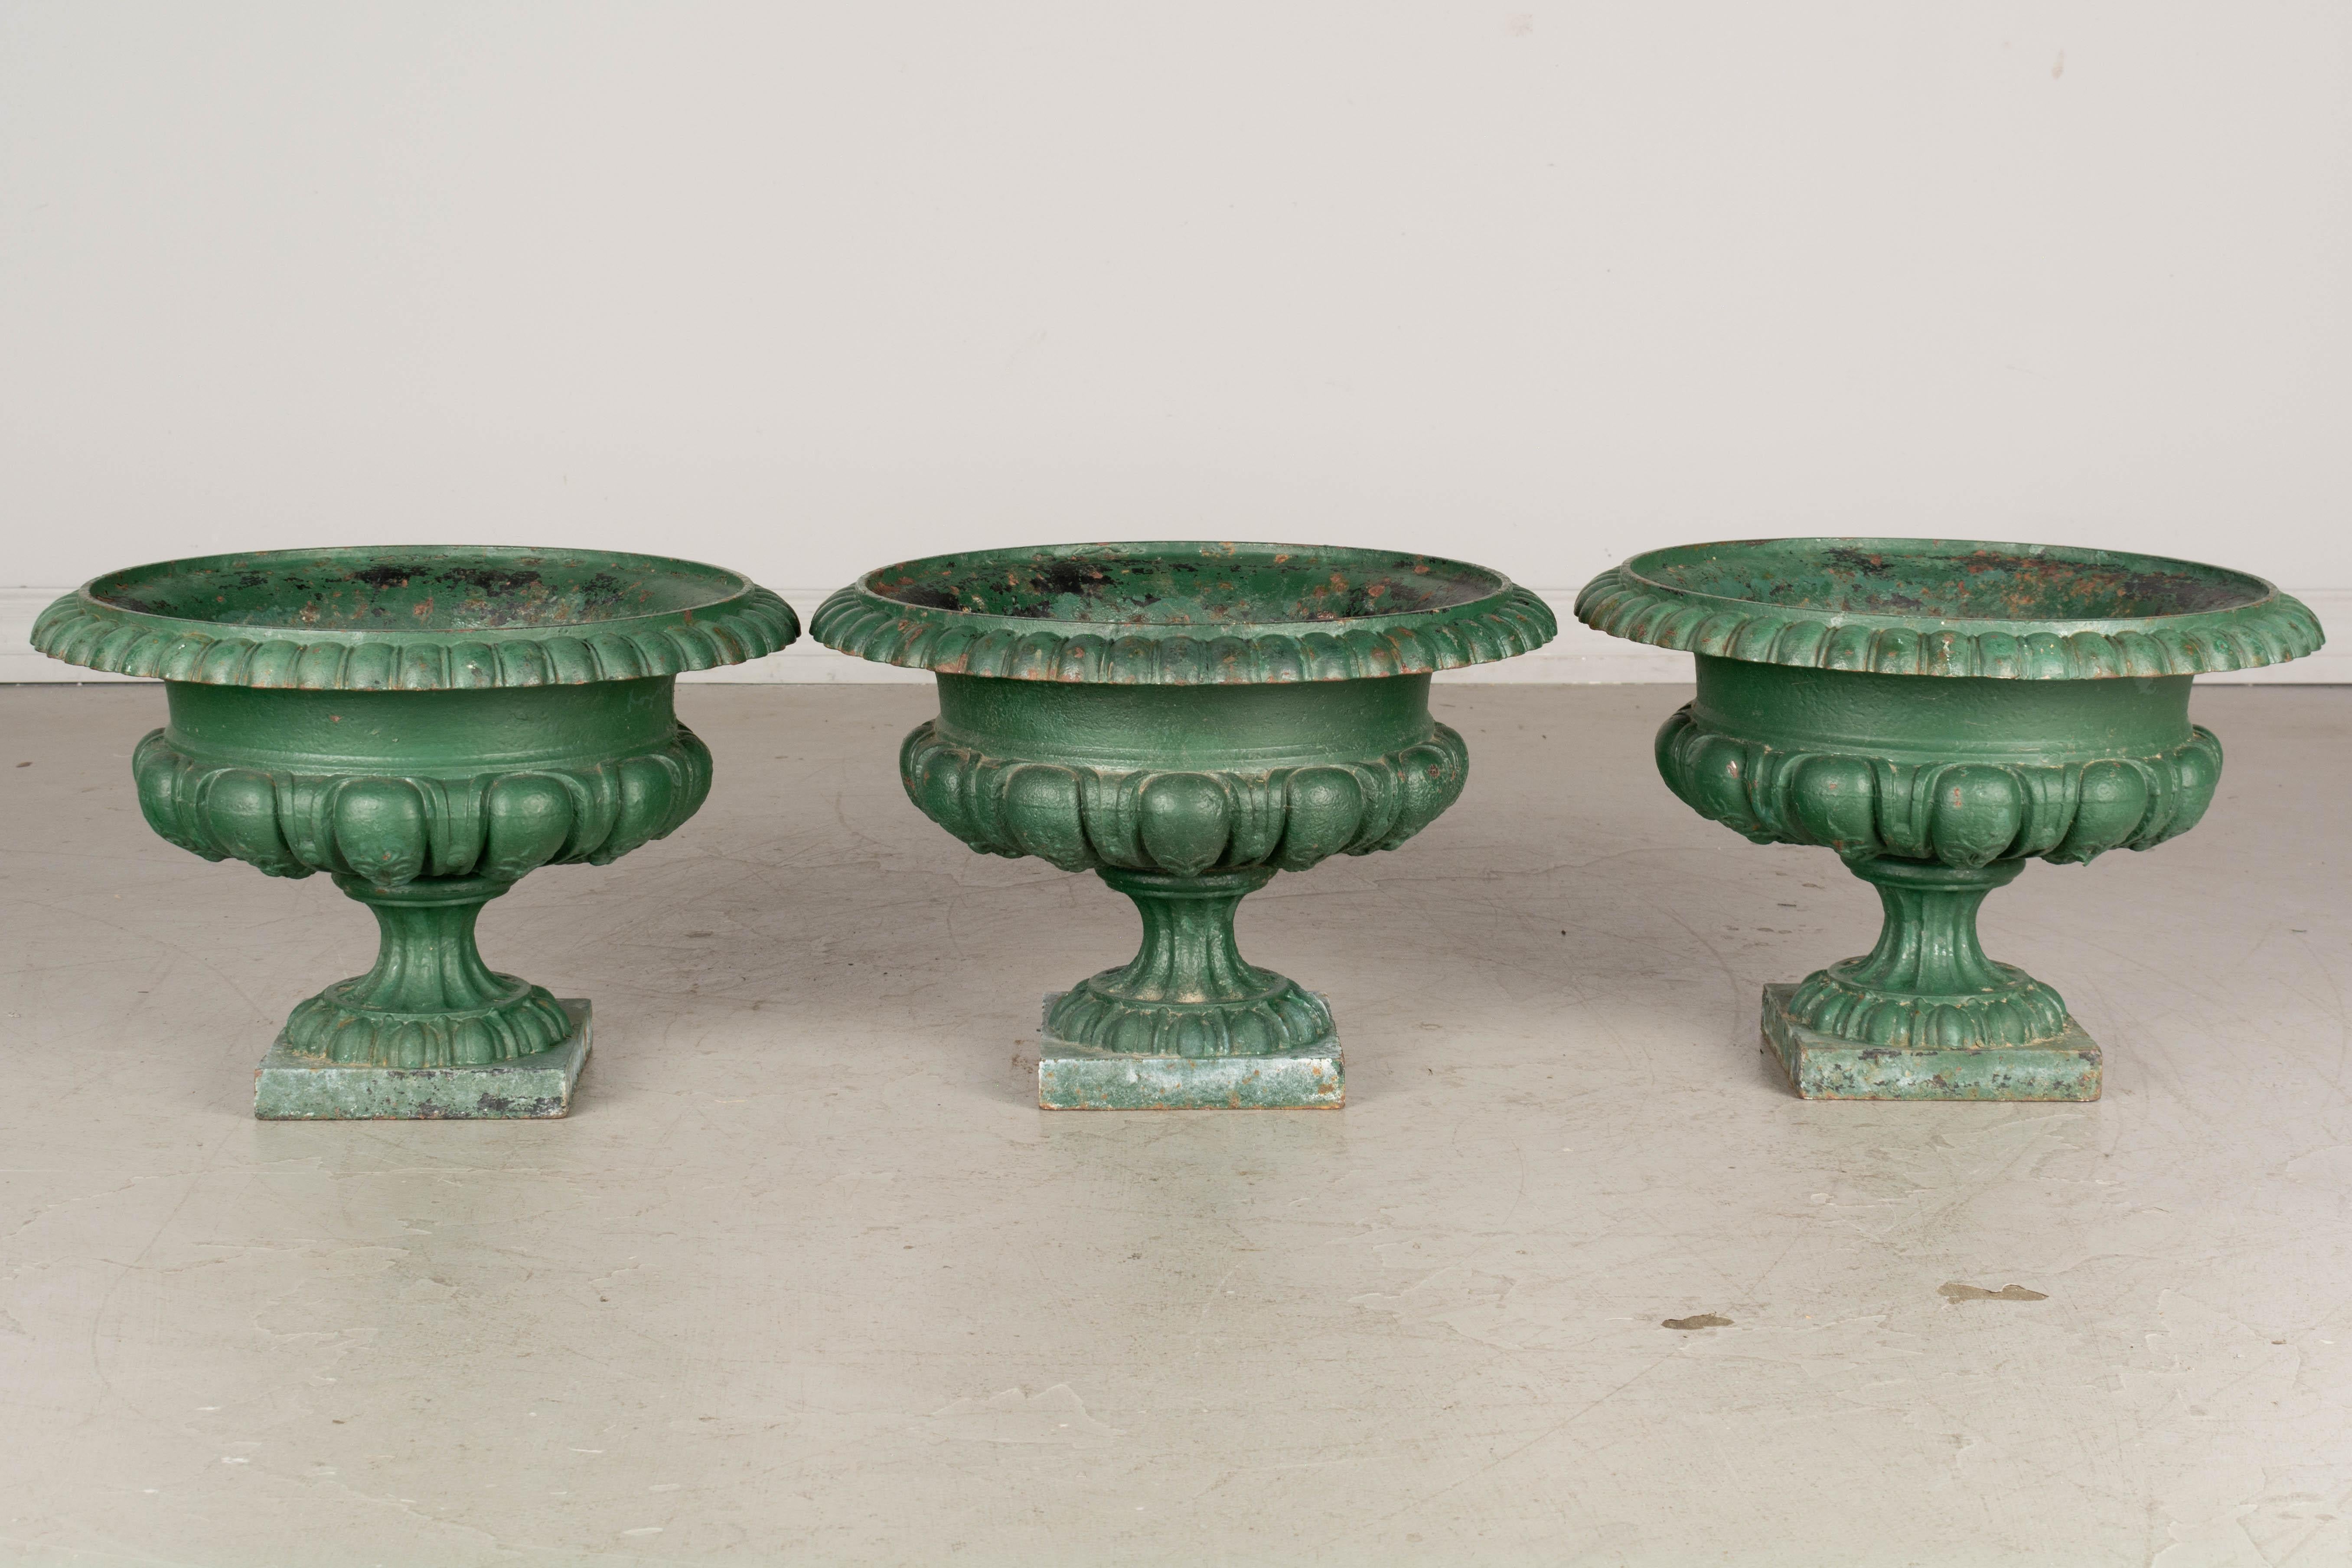 A set of three 19th century French cast iron garden urn planters with pedestal base and green patina. Good condition with minor paint loss and some rust.
Overall dimensions: 10.5 height x 16